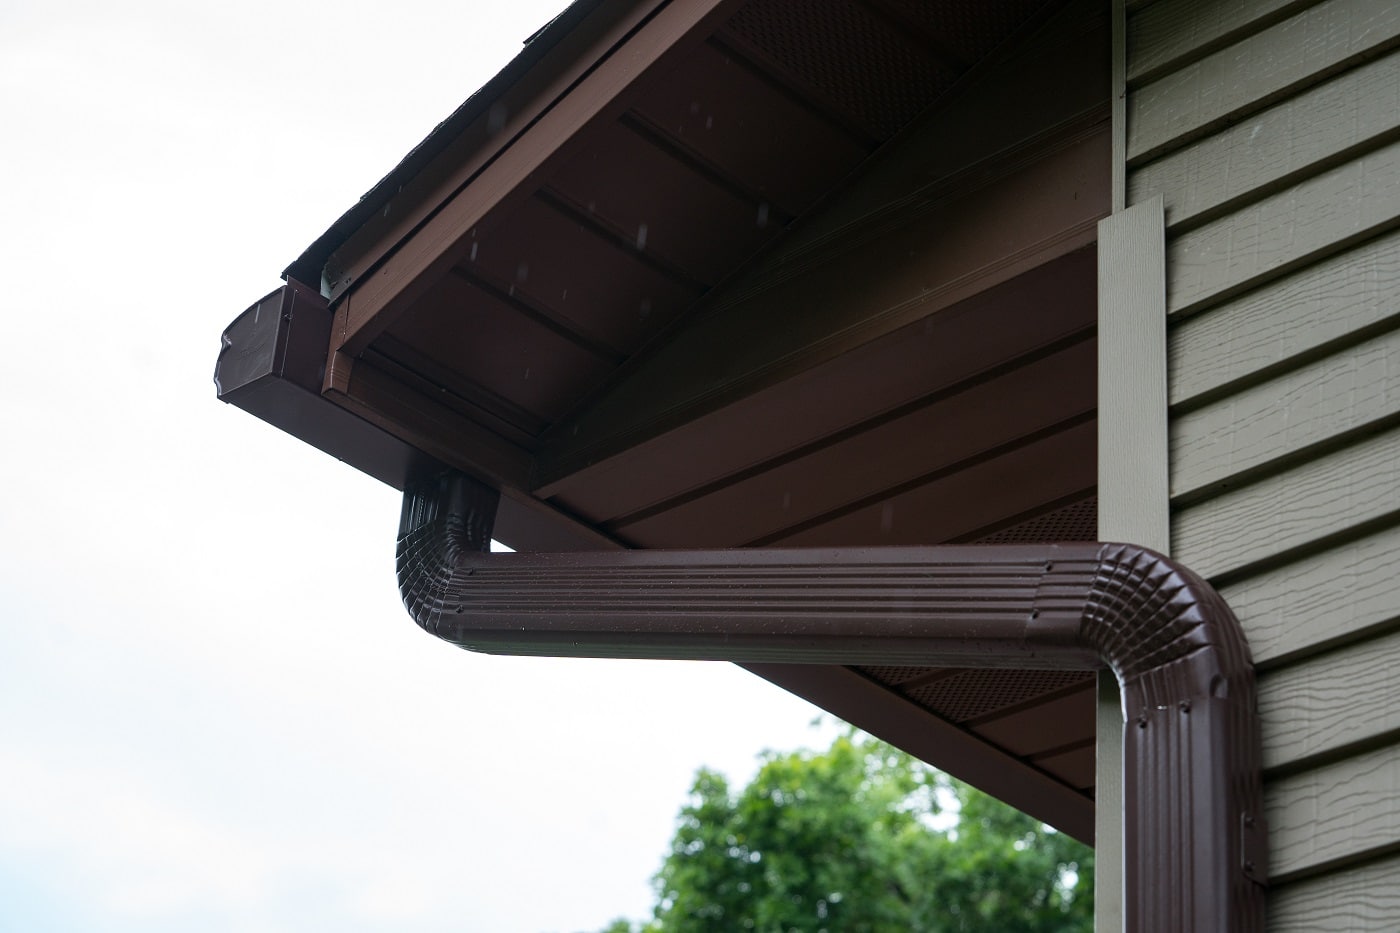 new gutters with gutter guards and downspouts